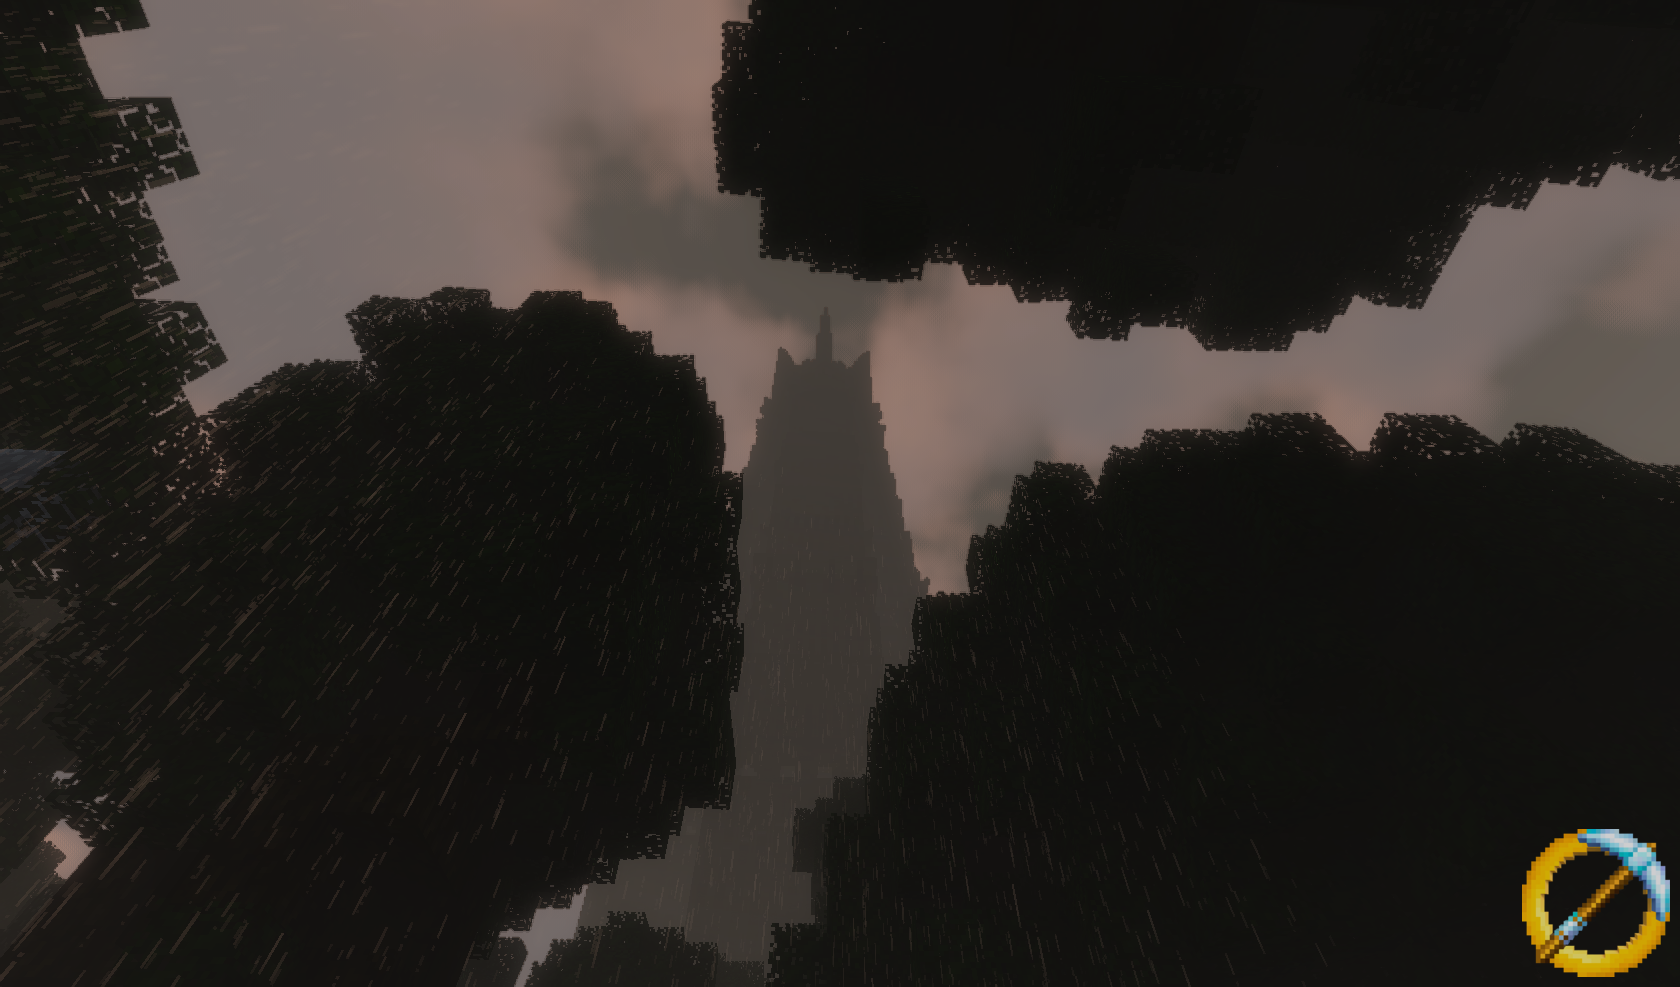 Isengard in a storm